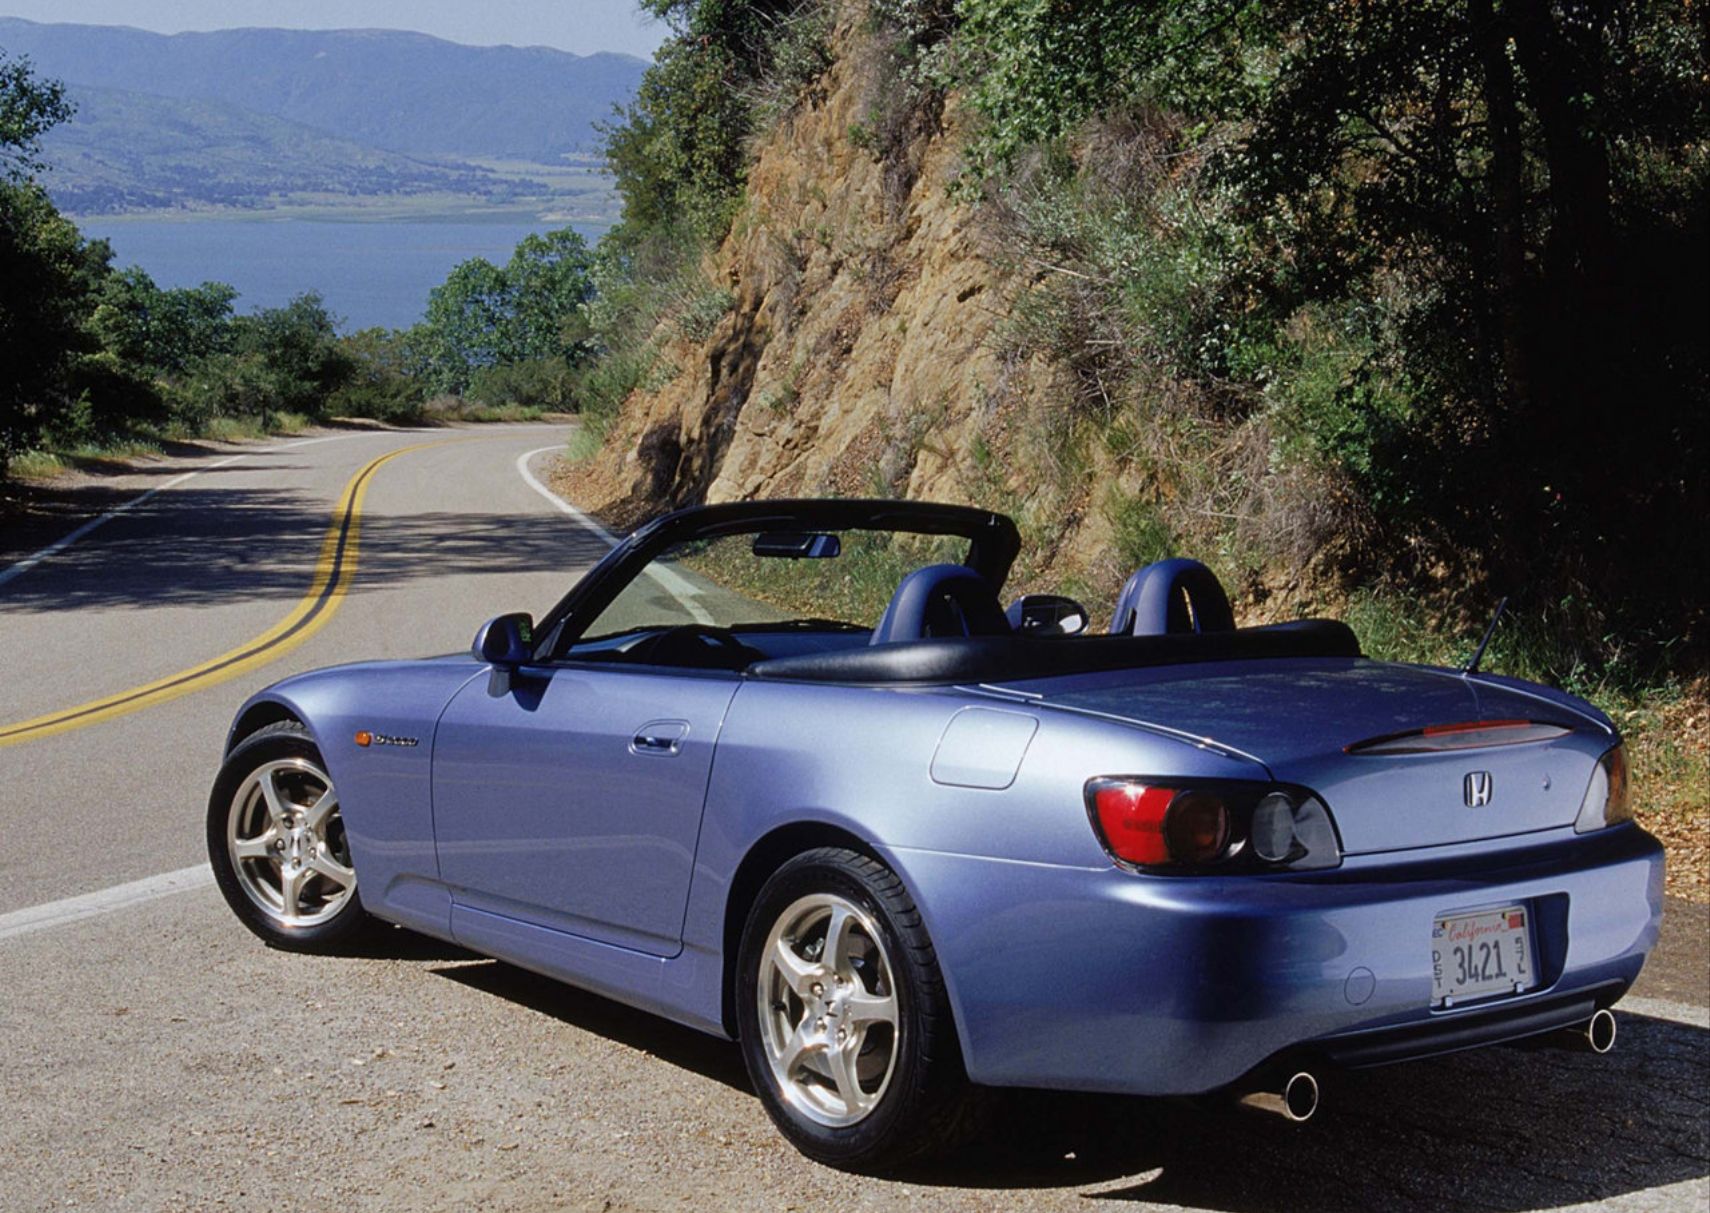 Honda-S2000-2002 Rear Quarter View In Blue Parked Up